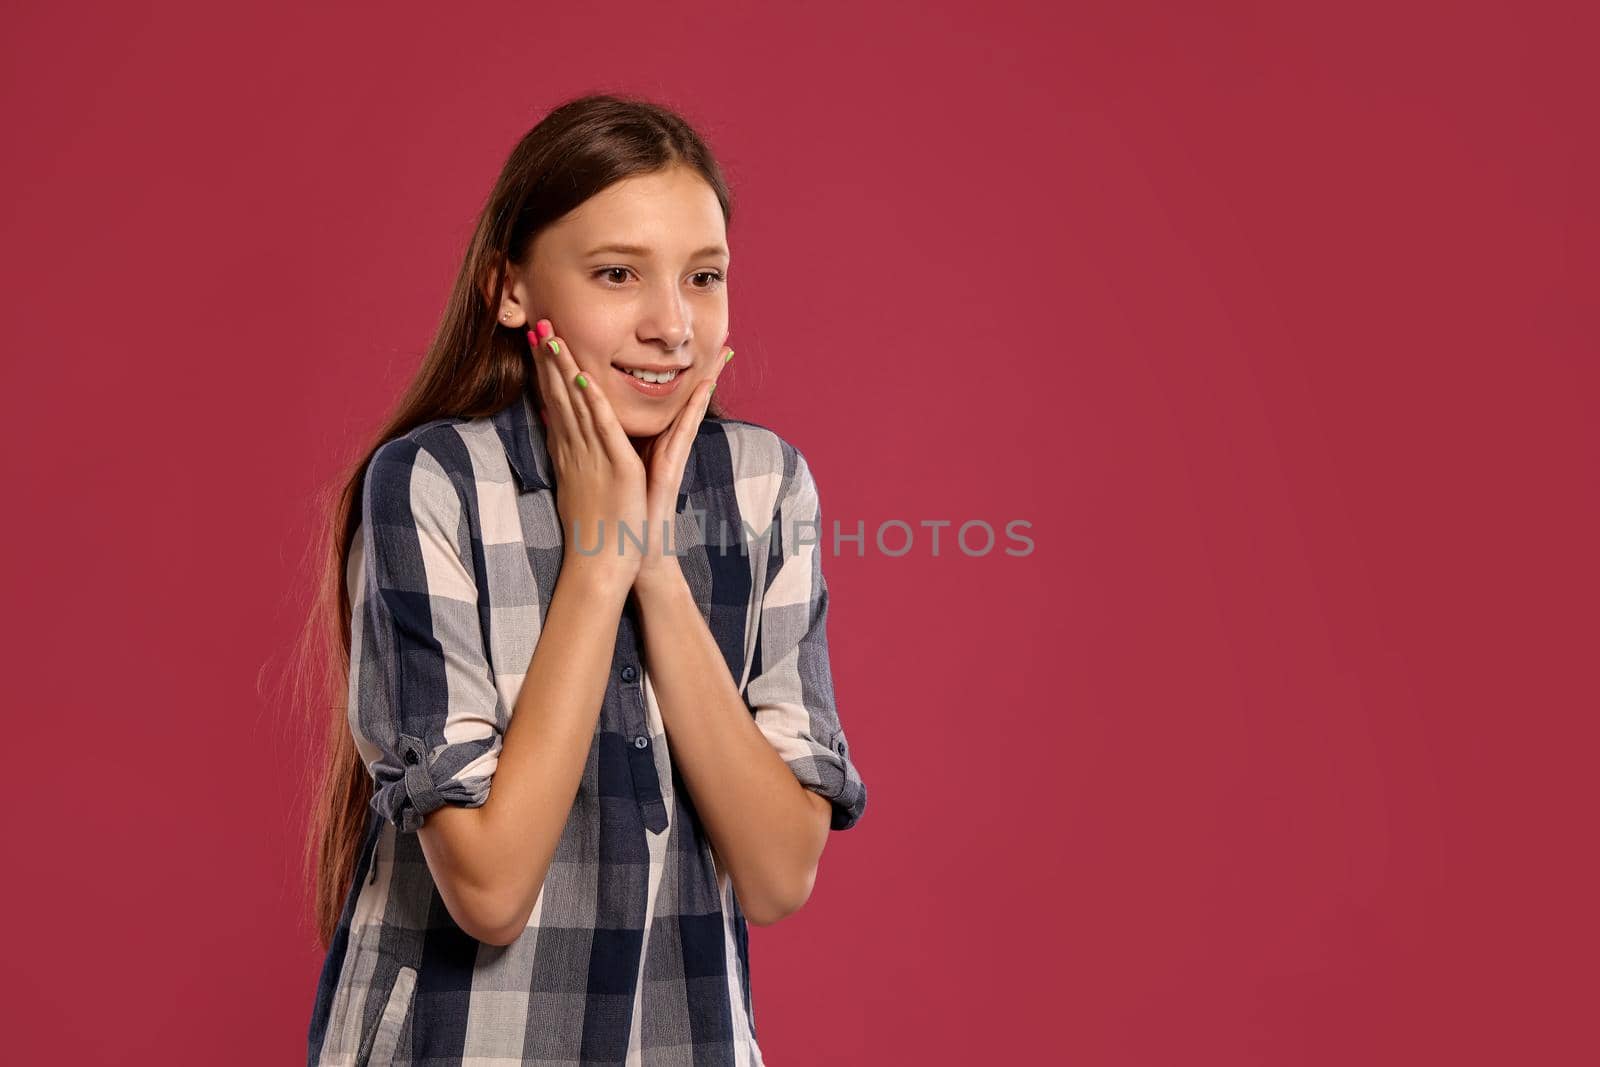 Portrait of an attractive teenage female in a casual checkered shirt looking wondered while posing against a pink studio background. Long hair, healthy clean skin and brown eyes. Sincere emotions concept. Copy space.